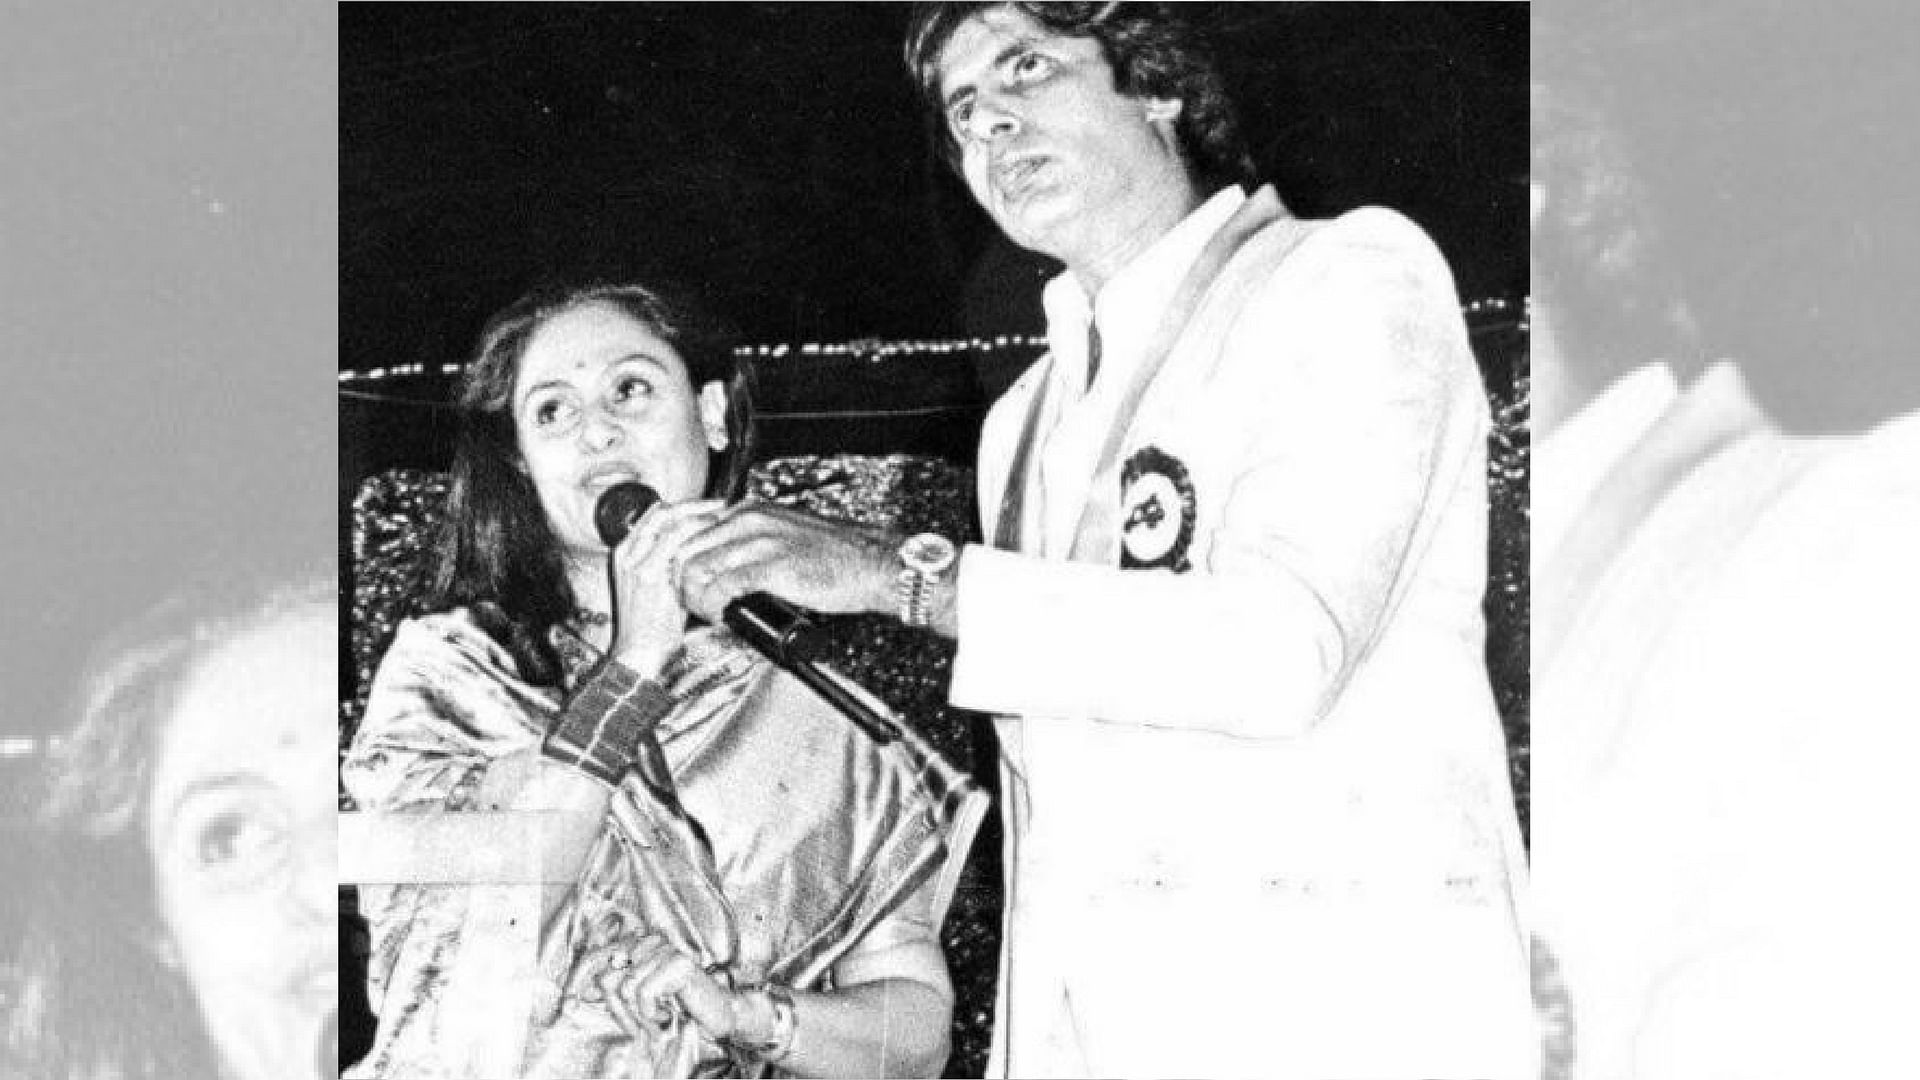 Amitabh Bachchan shares a memorable picture with wife Jaya  on Valentine’s Day.